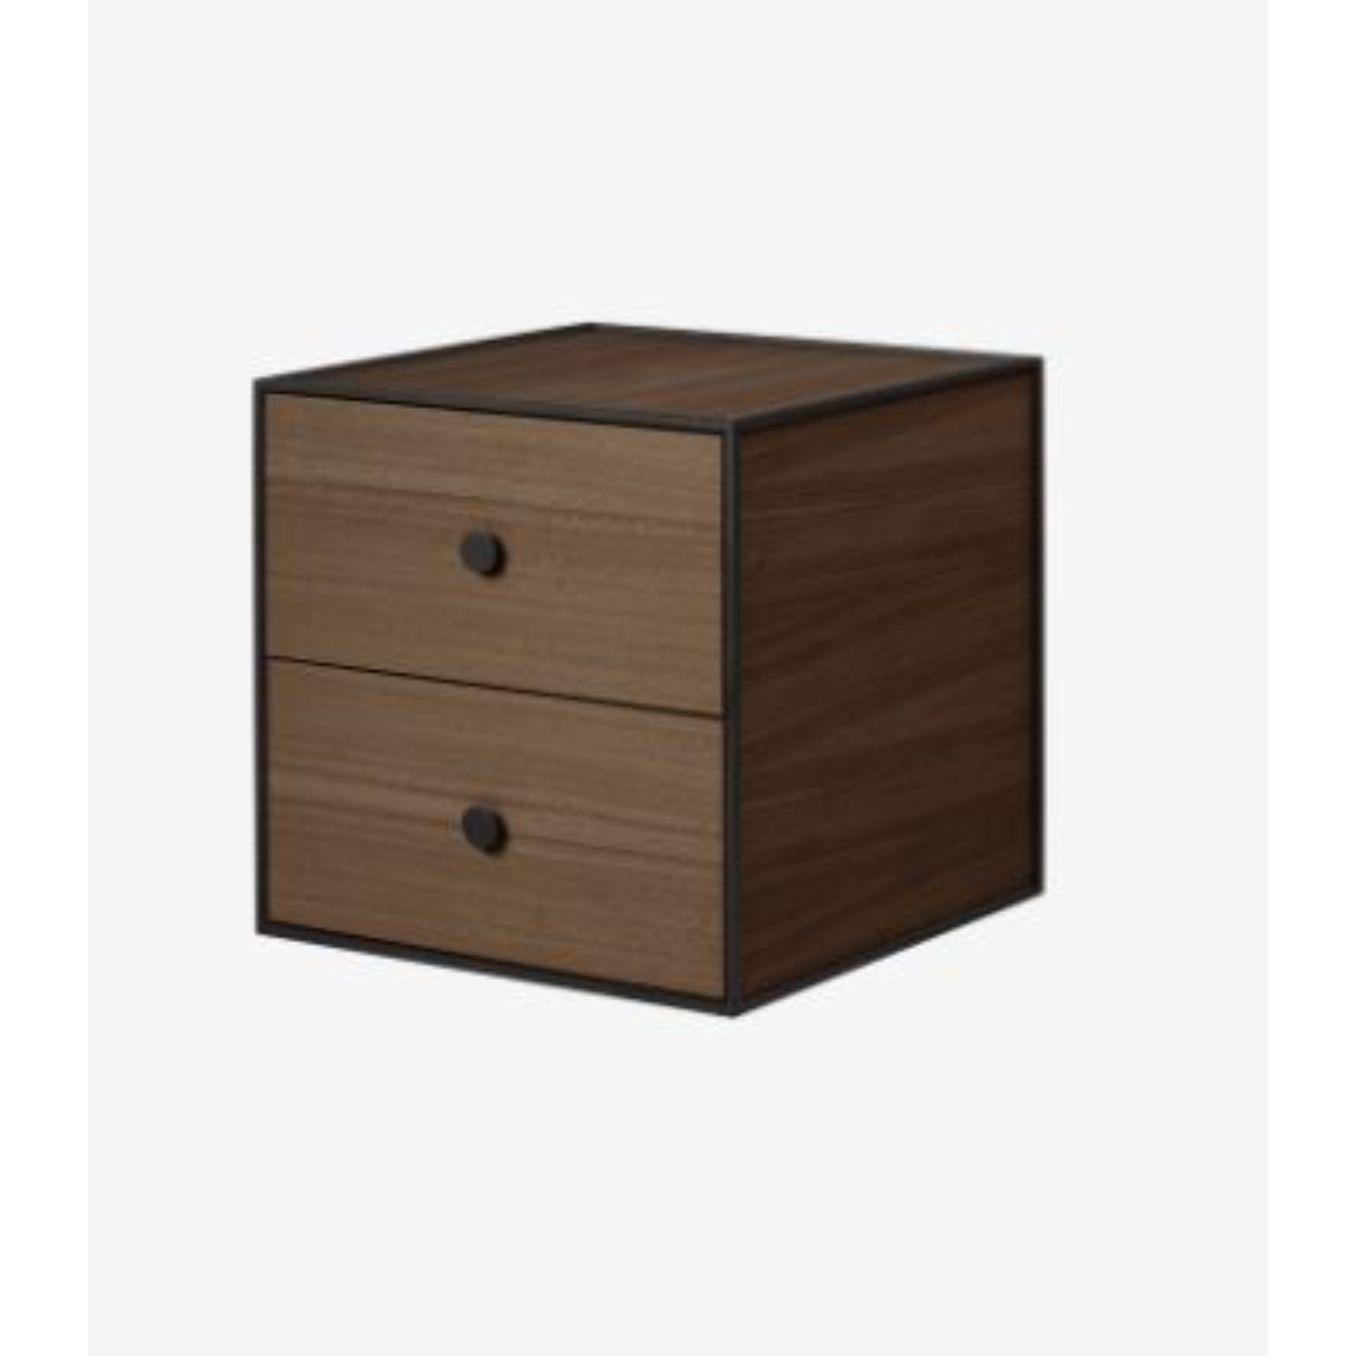 35 smoked oak frame box with 2 drawer by Lassen
Dimensions: W 35 x D 35 x H 35 cm 
Materials: Finér, Melamin, Melamin, Melamine, metal, veneer, oak
Also available in different colors and dimensions.
Weight: 10.50, 10.50, 11.50, 11.50 Kg

Frame